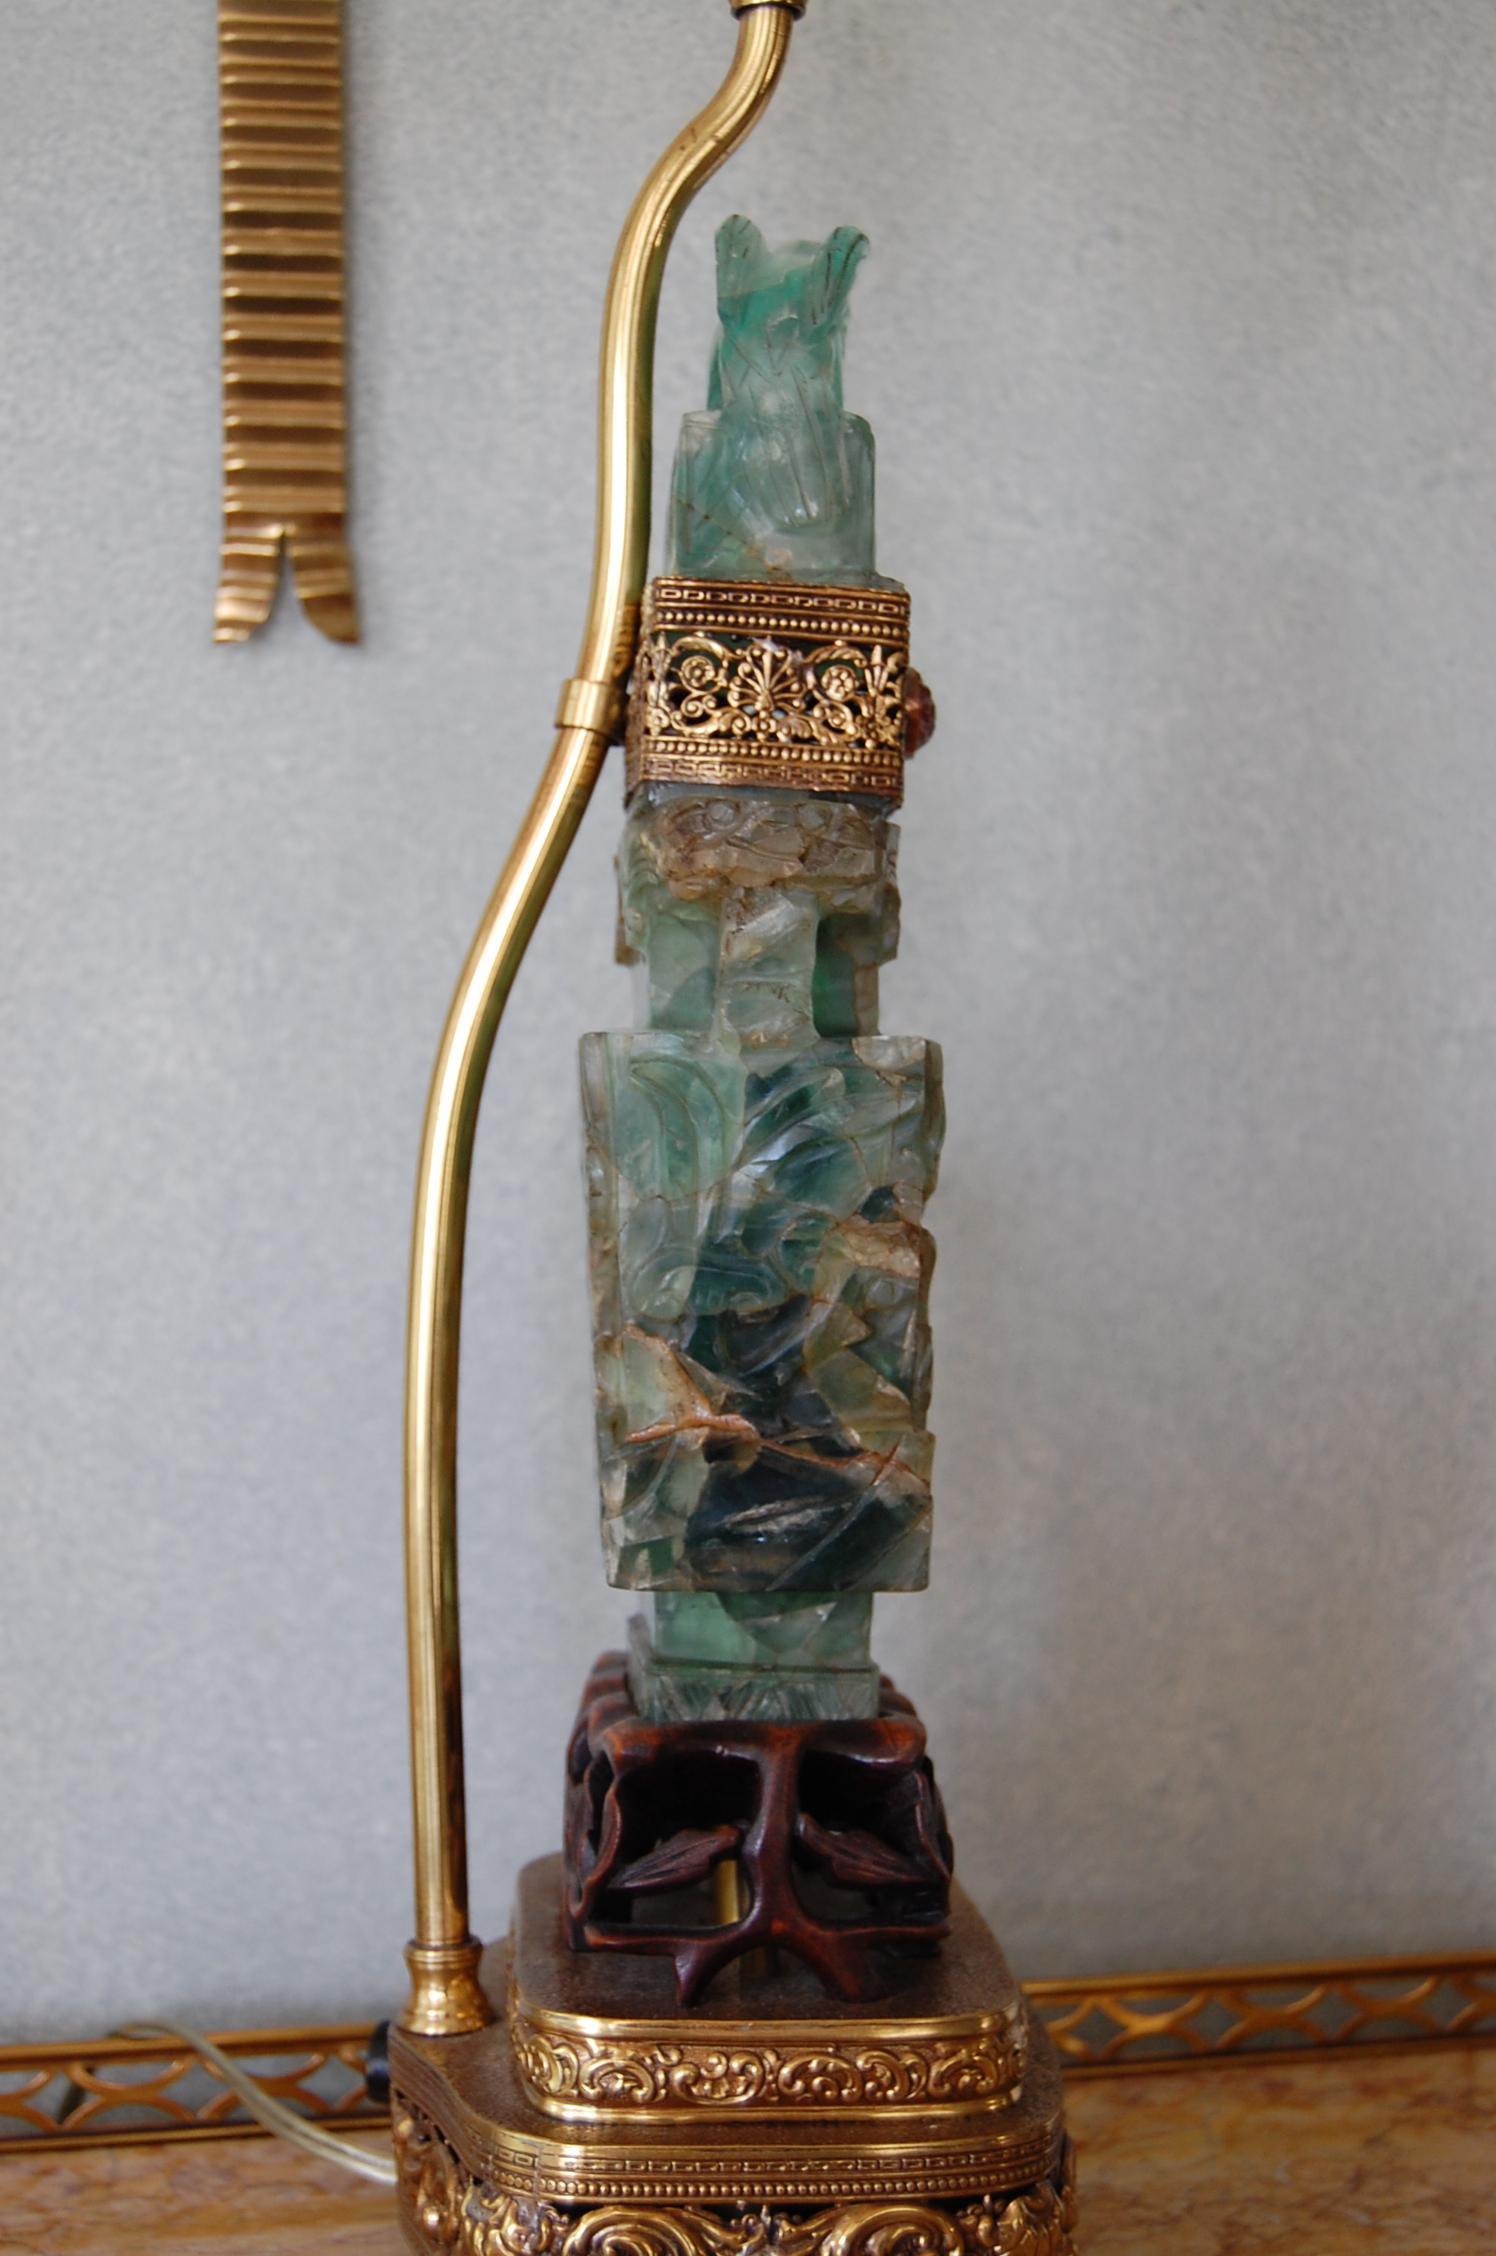 Carved Chinese Quartz Lamps on Brass and Wood Bases, Mid-19th Century, Pair For Sale 3